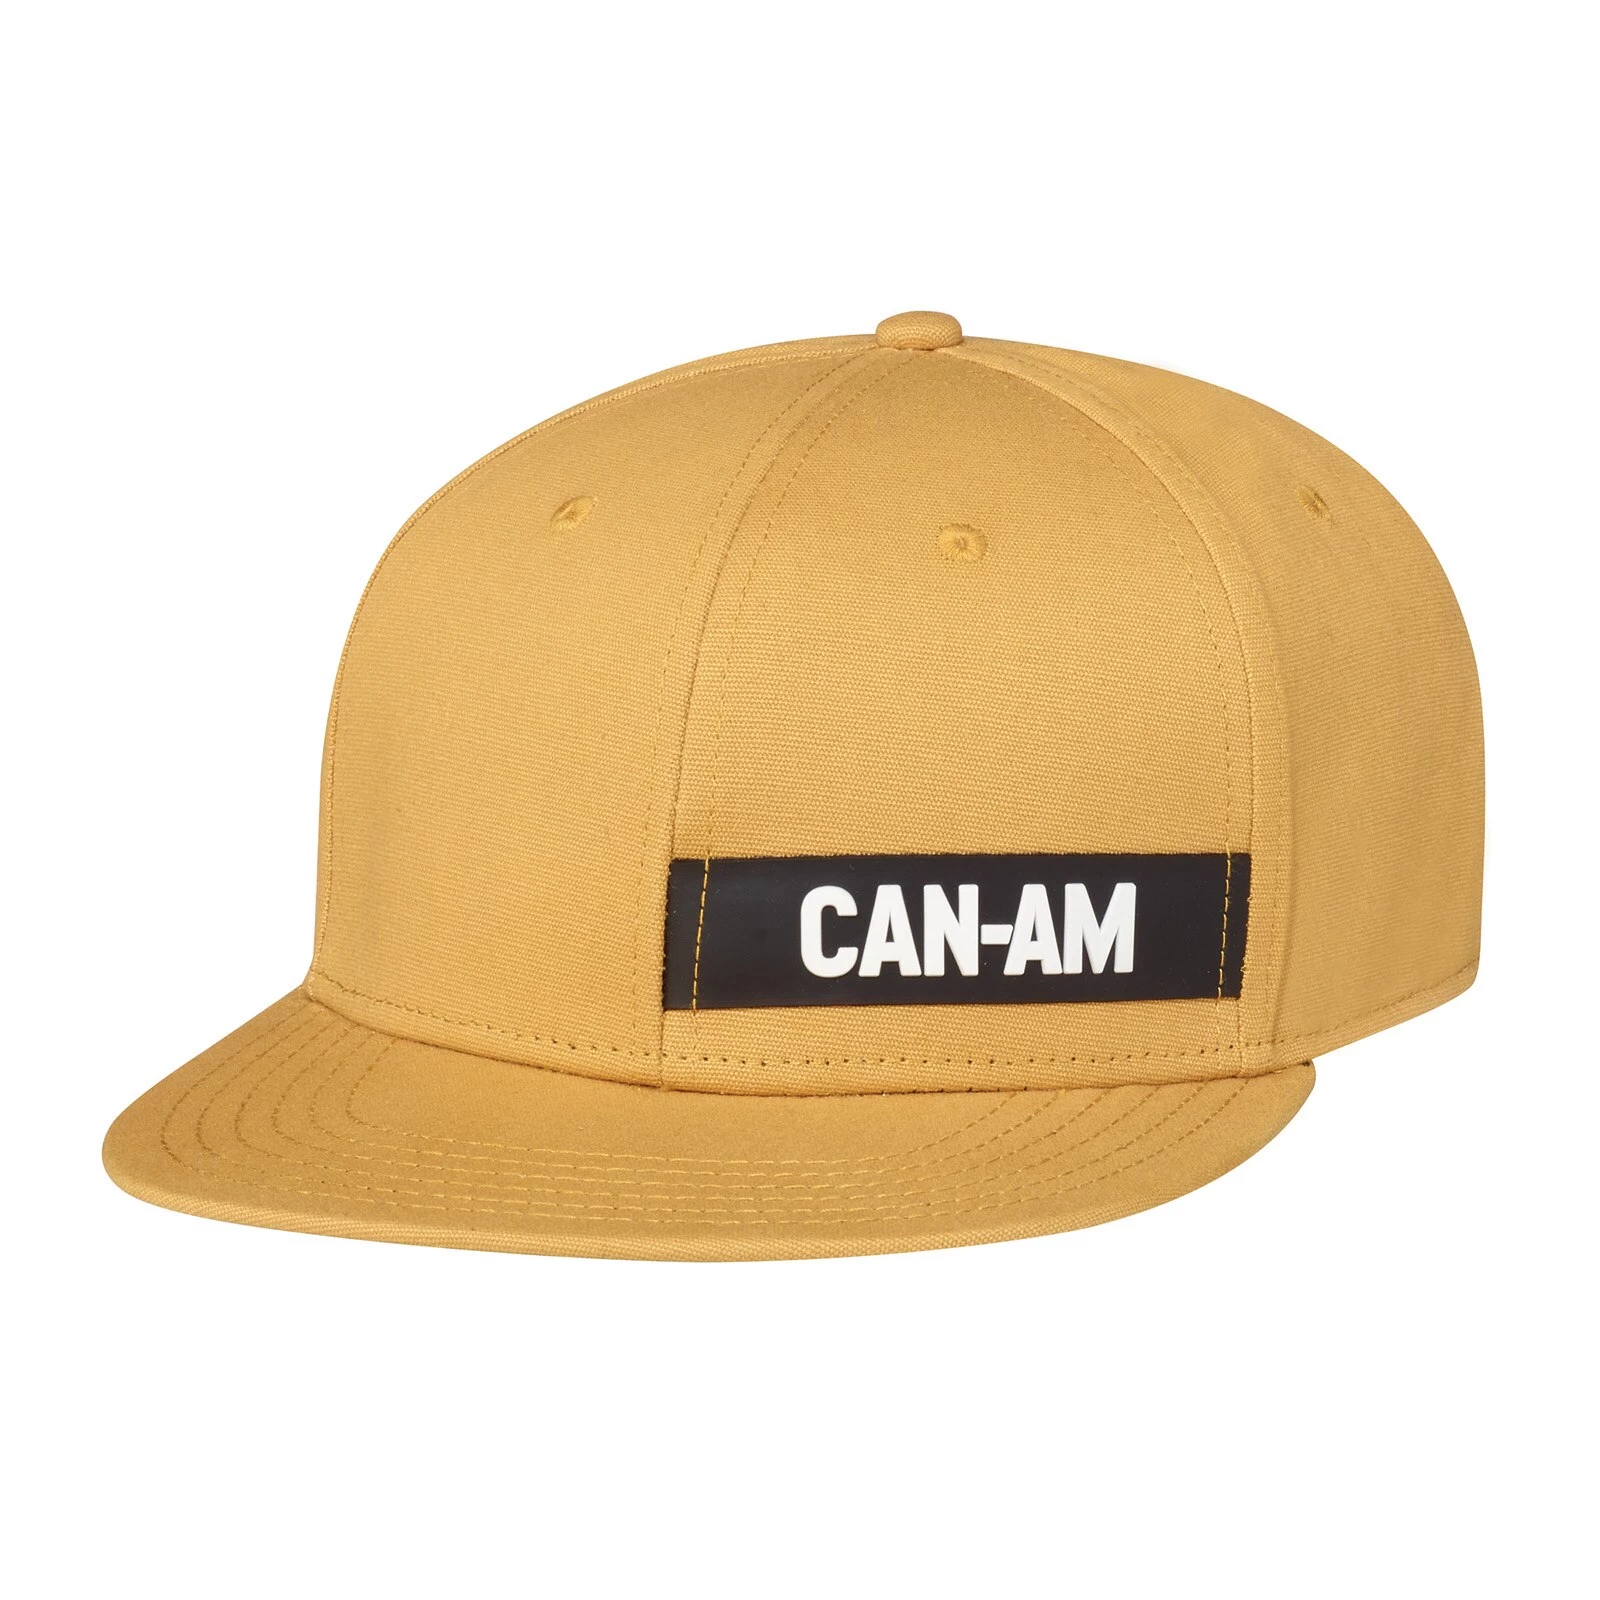 Can-am Bombardier Cruise Cap